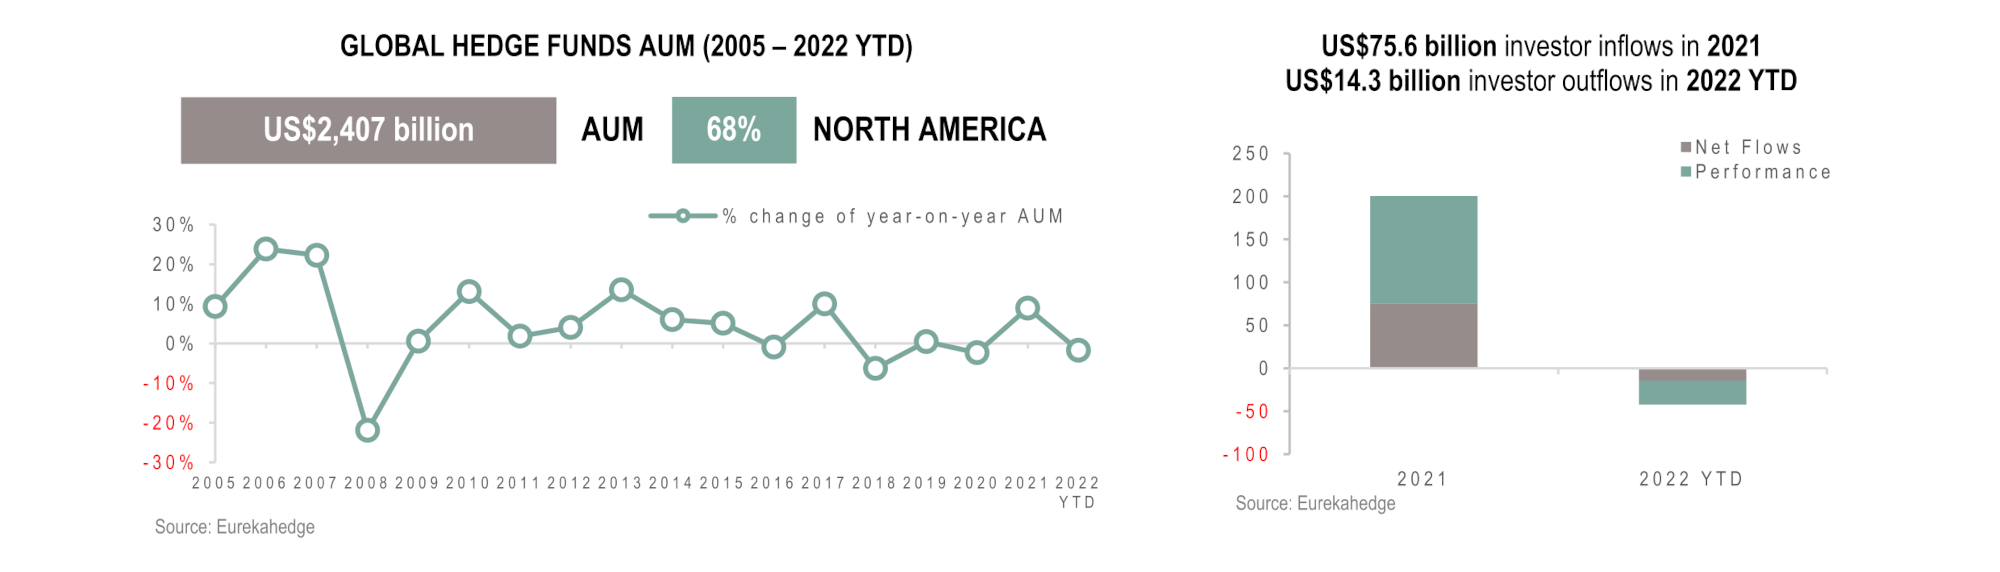 Global Hedge Funds Infographic April 2022 - AUM